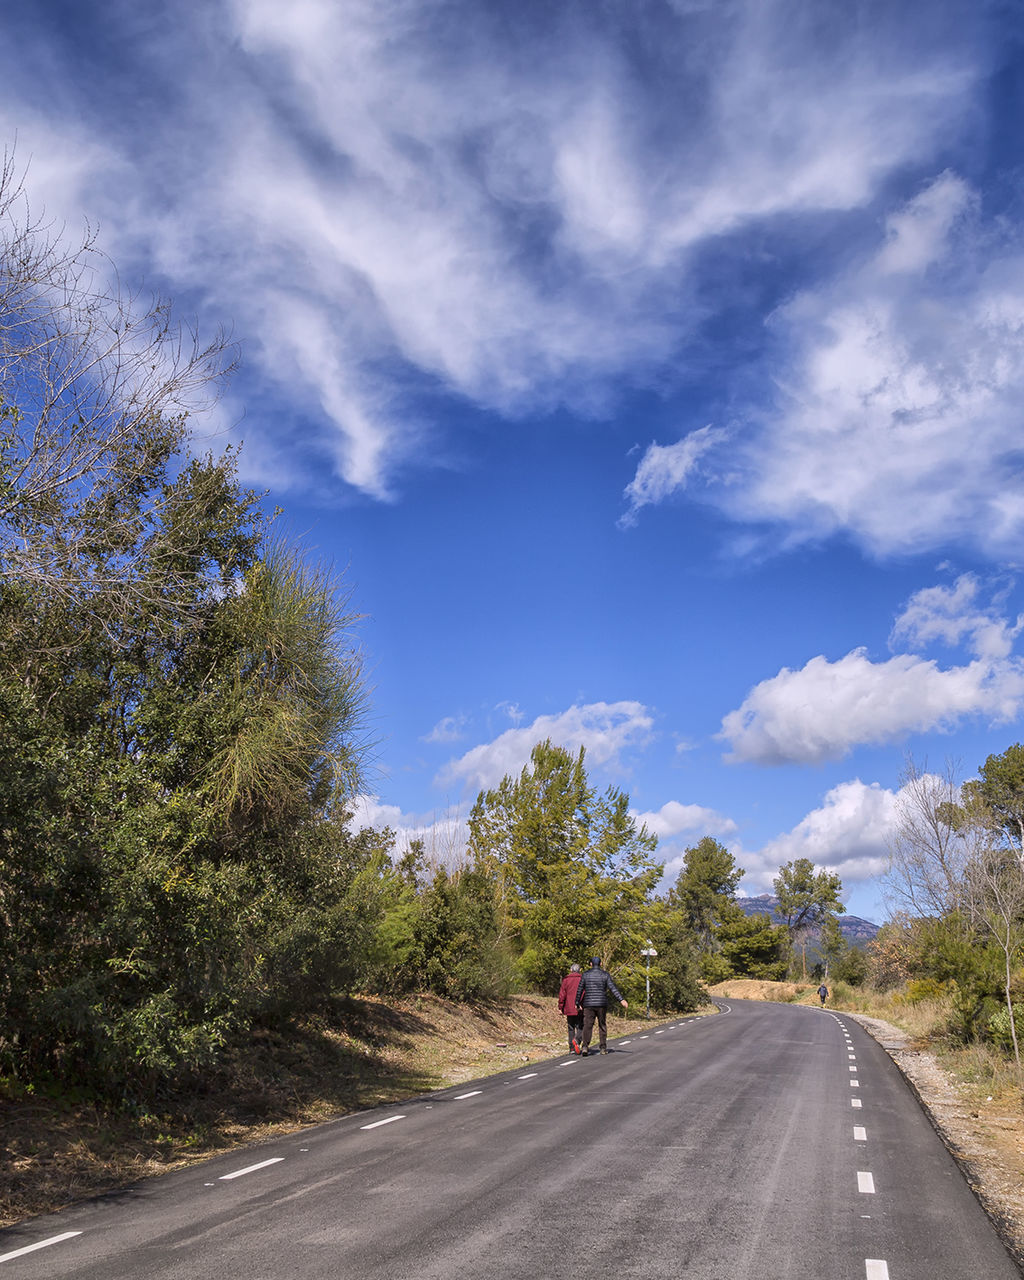 road, the way forward, transportation, sky, rear view, cloud - sky, tree, day, nature, full length, real people, one person, outdoors, landscape, scenics, beauty in nature, men, winding road, people